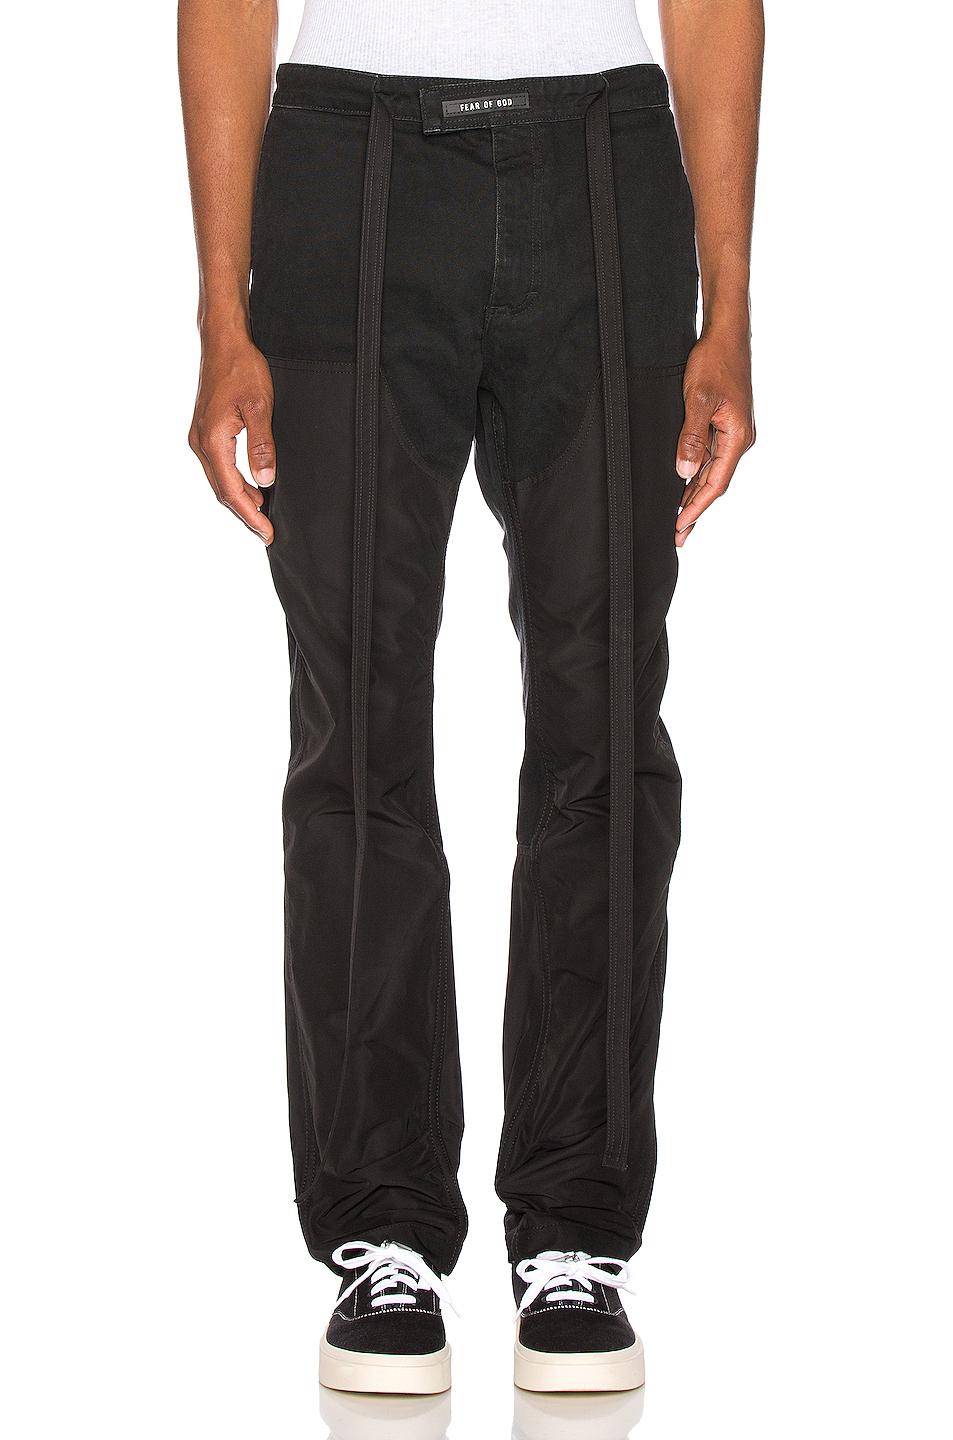 Fear Of God Synthetic Nylon Double Front Work Pant in Black for Men - Lyst